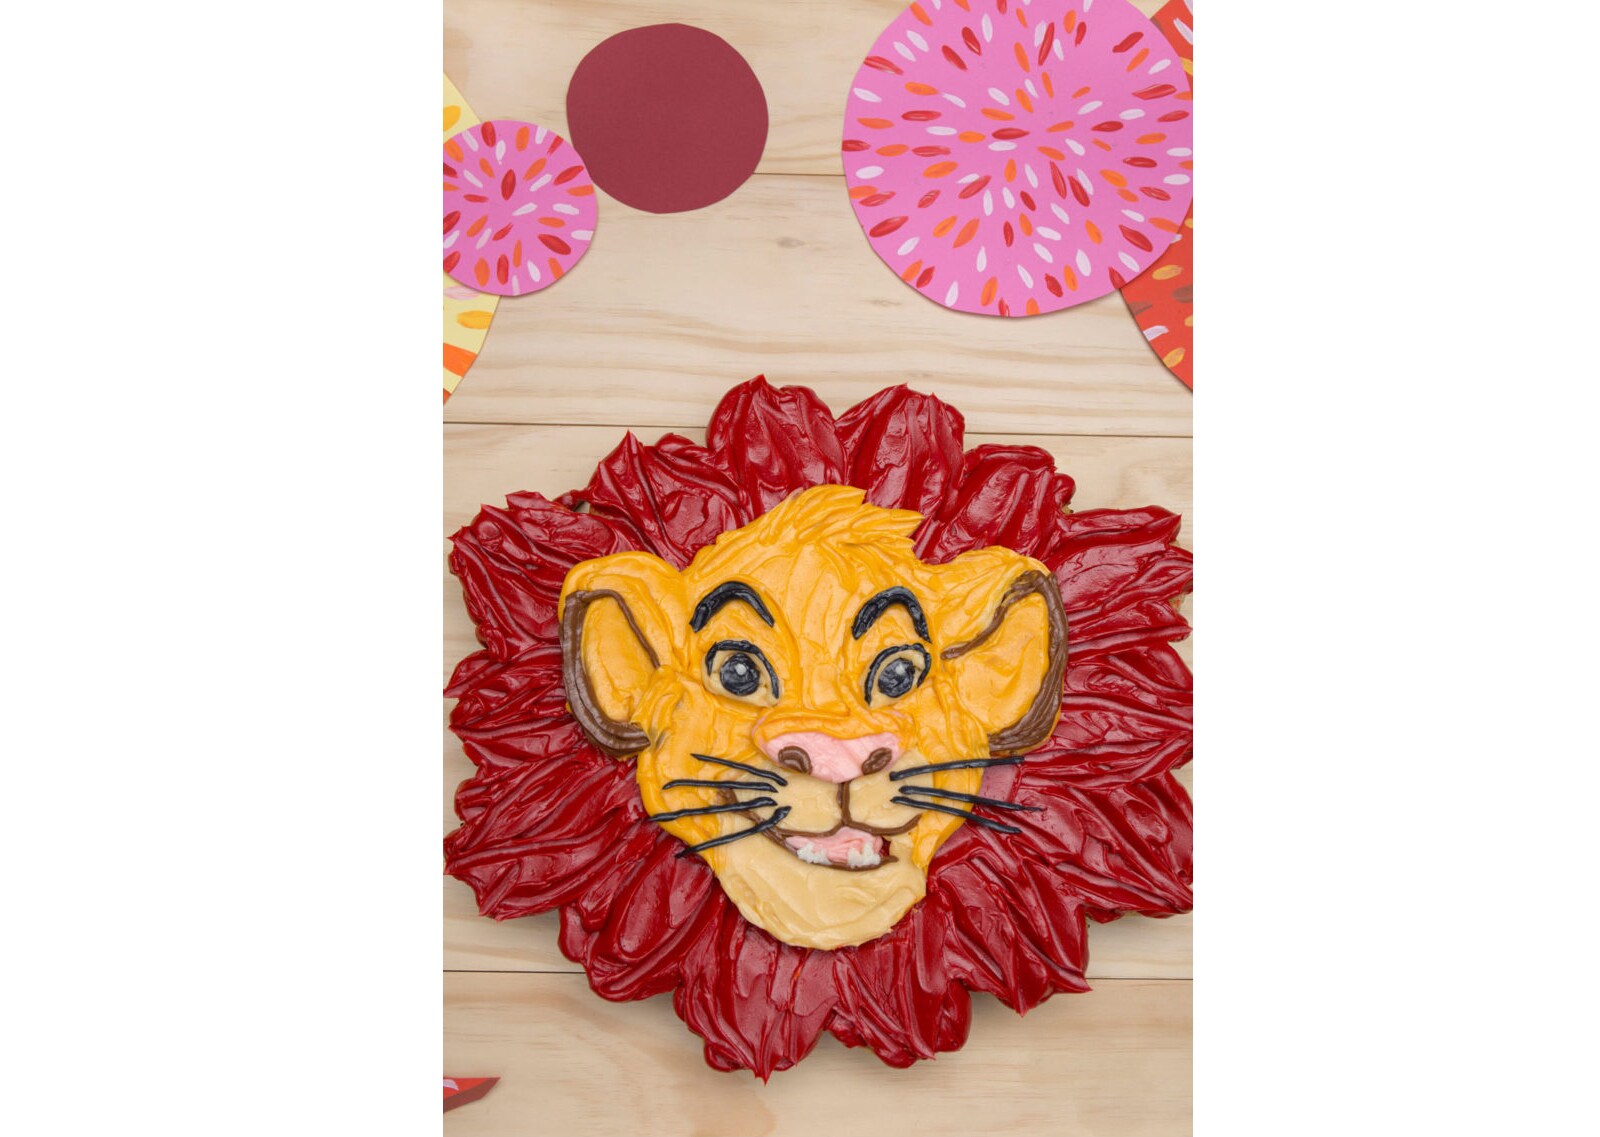 The Lion King Movie Simba Cave Edible Cake Topper Image